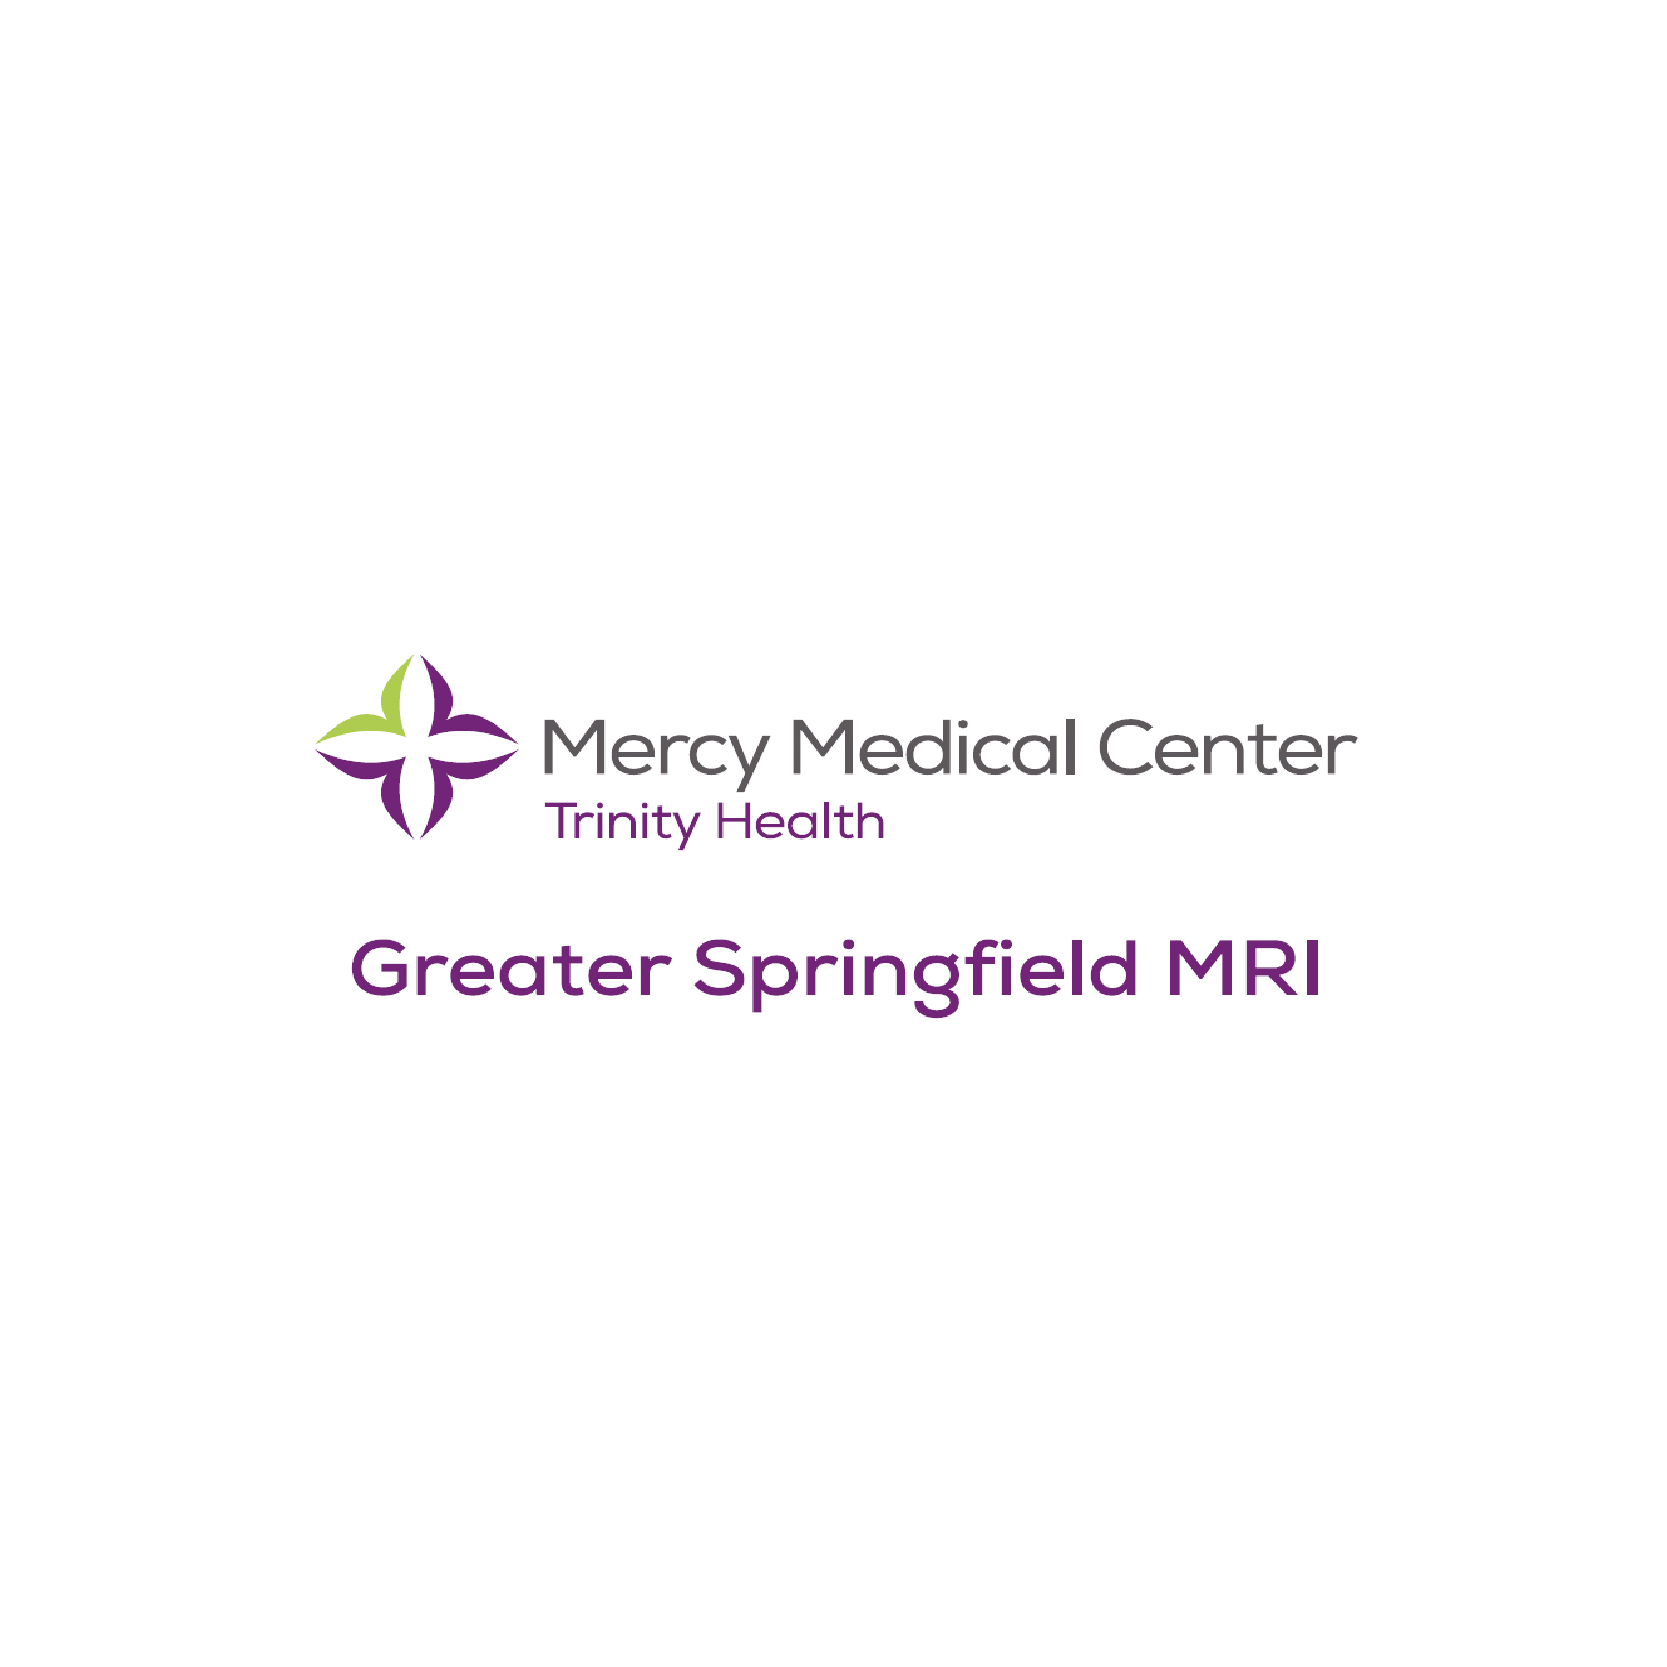 Greater Springfield MRI at Mercy Medical Center